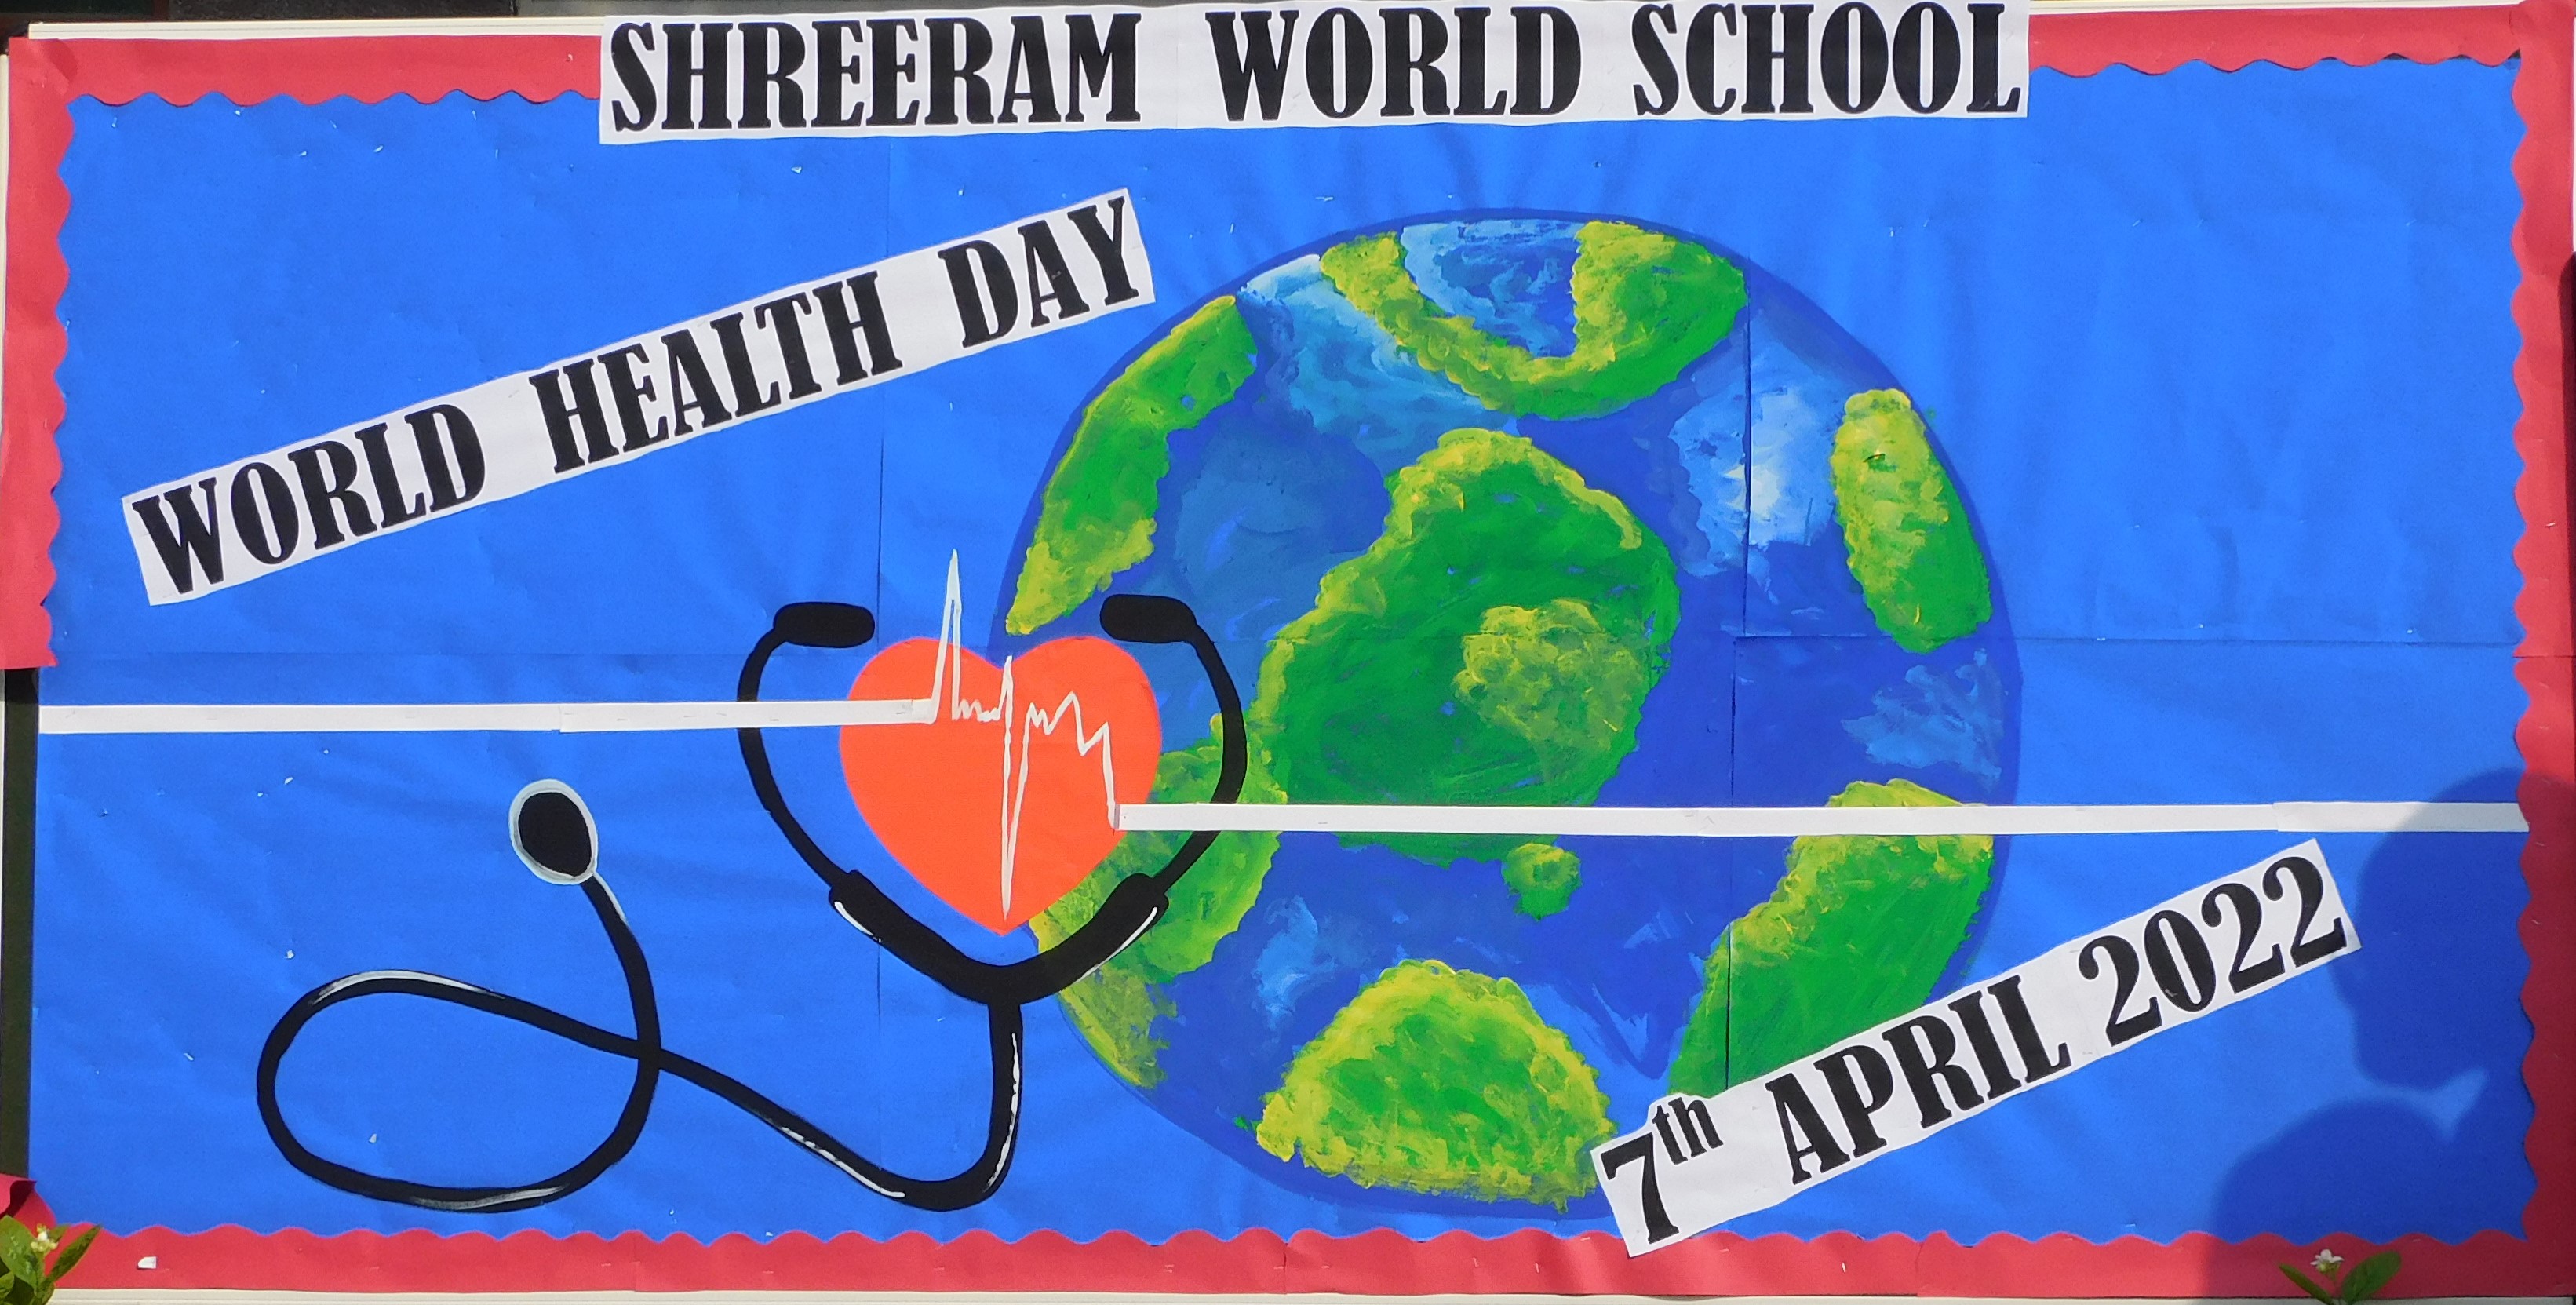 : SPECIAL ASSEMBLY ON WORLD HEALTH DAY